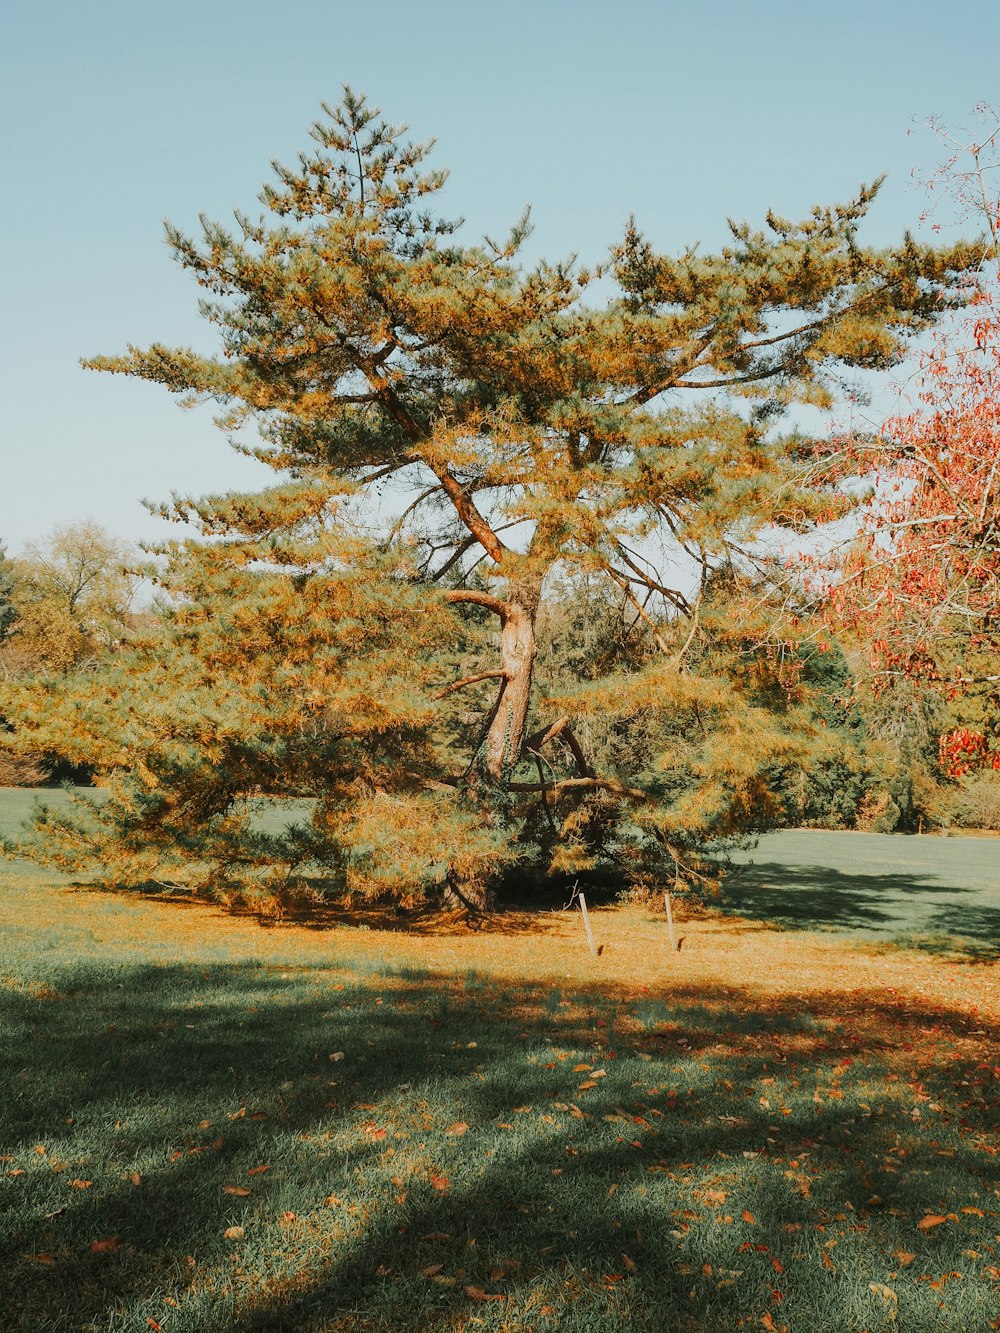 a large pine tree in the middle of a park